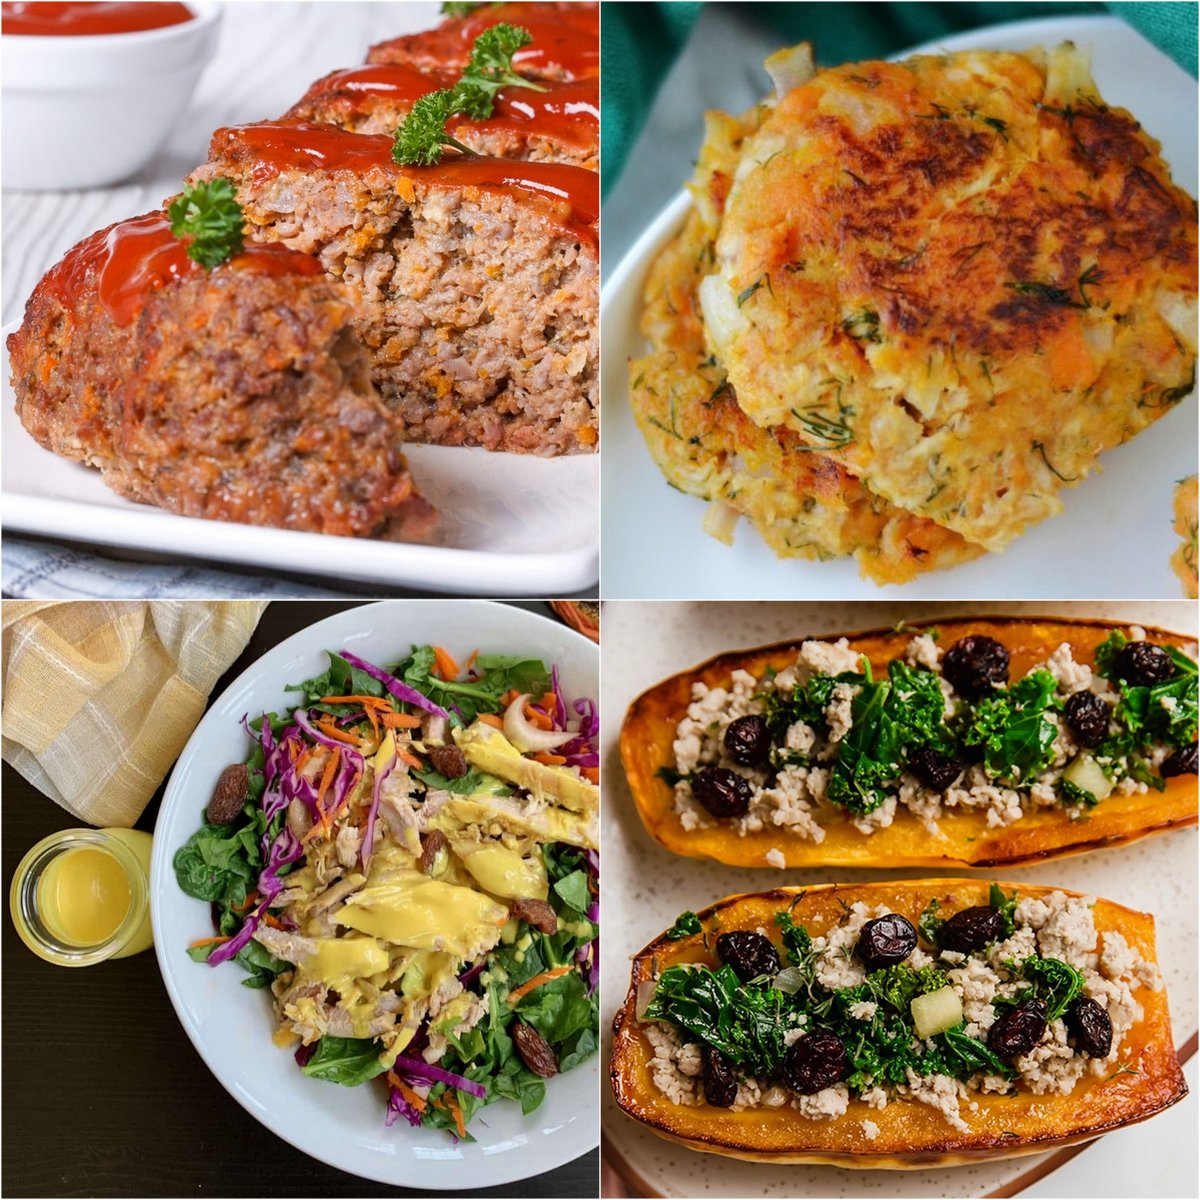 Paleo AIP Recipe Roundtable #393 | Phoenix Helix - *Featured Recipes: Slow Cooker Meatloaf, Sweet Potato and Dill Tuna Patties, Curried Turkey Salad, and Stuffed Delicata Squash.